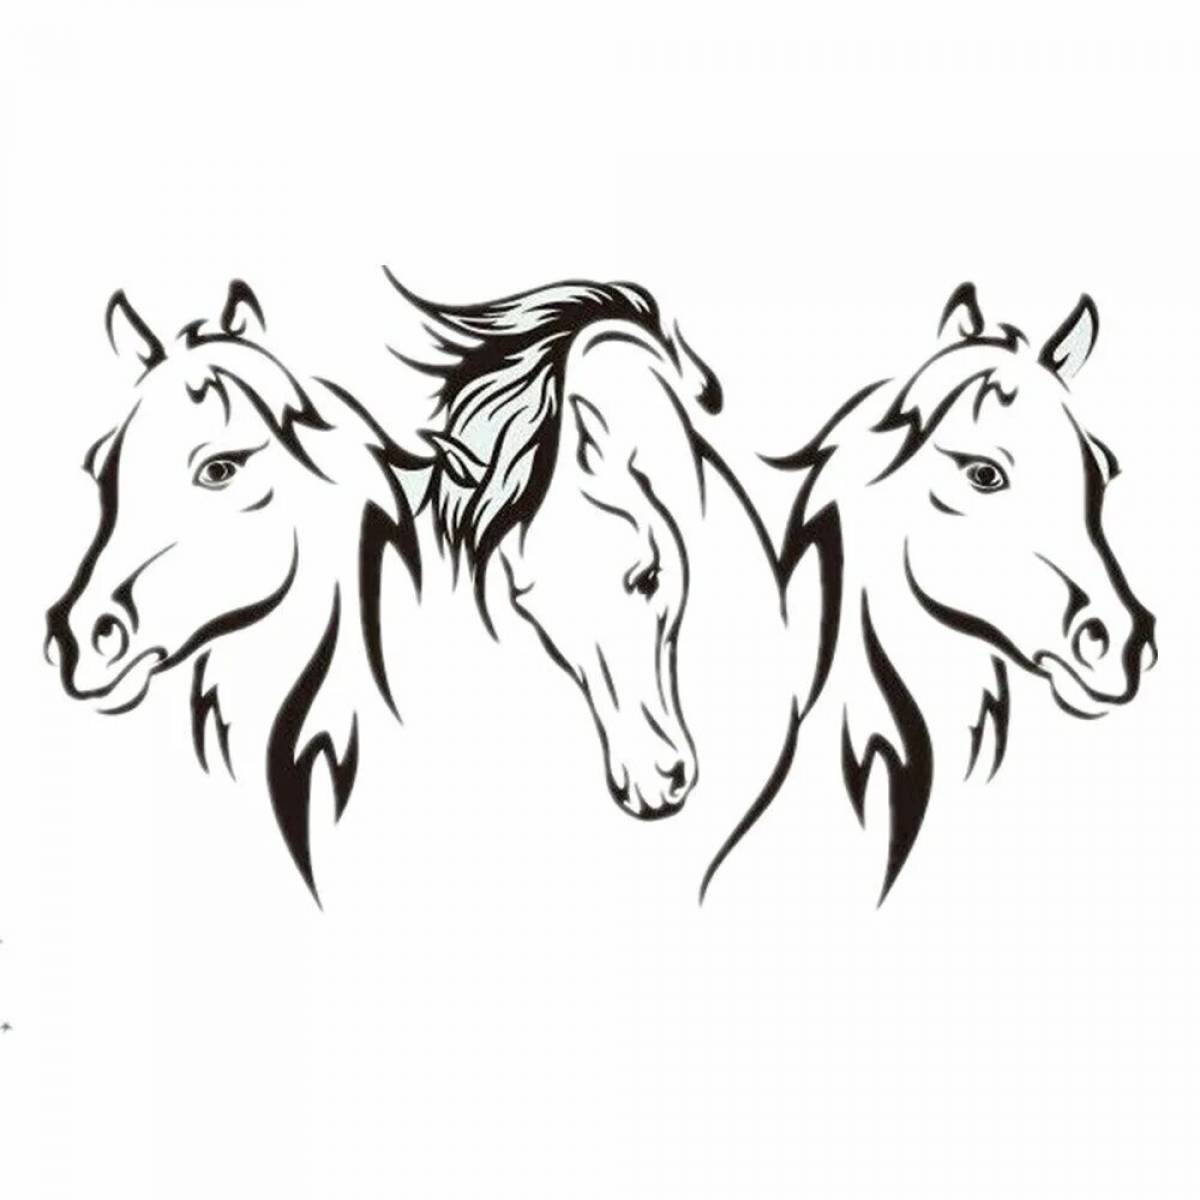 Coloring book shining trio of horses